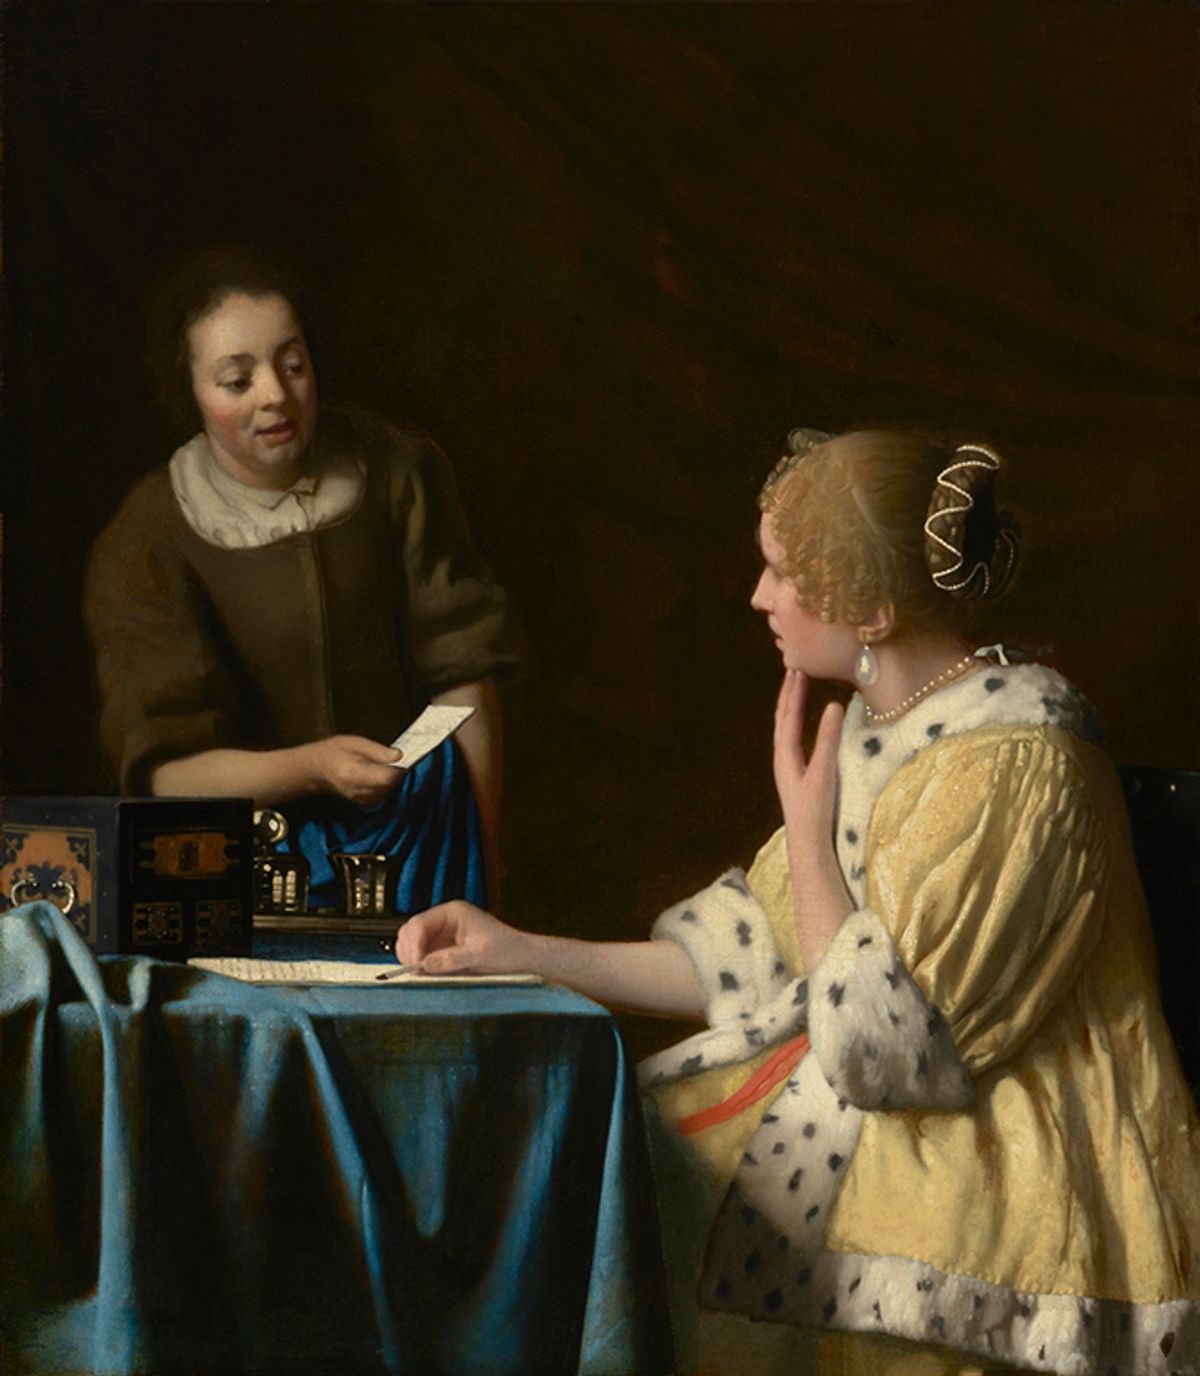 Vermeer's Mistress and Maid (1667-68), one of three paintings by the artist owned by the Frick Collection The Frick Collection © 2018;  Photo: Michael Bodycomb